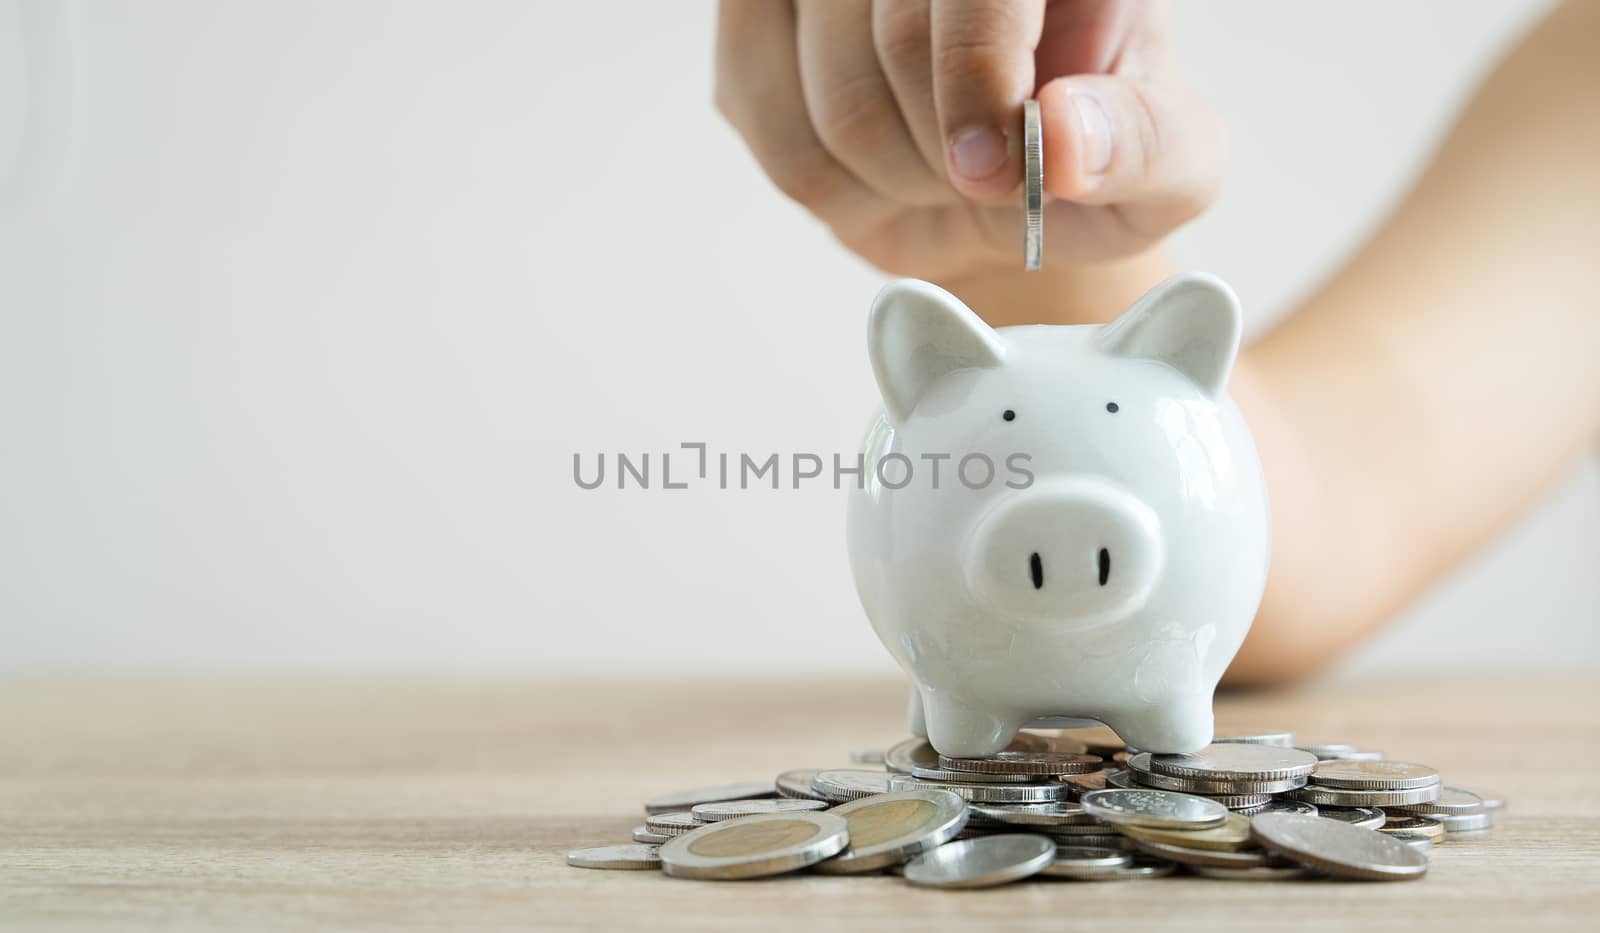 Money savings concepts hand holding coin to put in piggy bank to spend on expenses such as savings, tourism, investment, emergency, retirement on wooden table with blur background and copy space